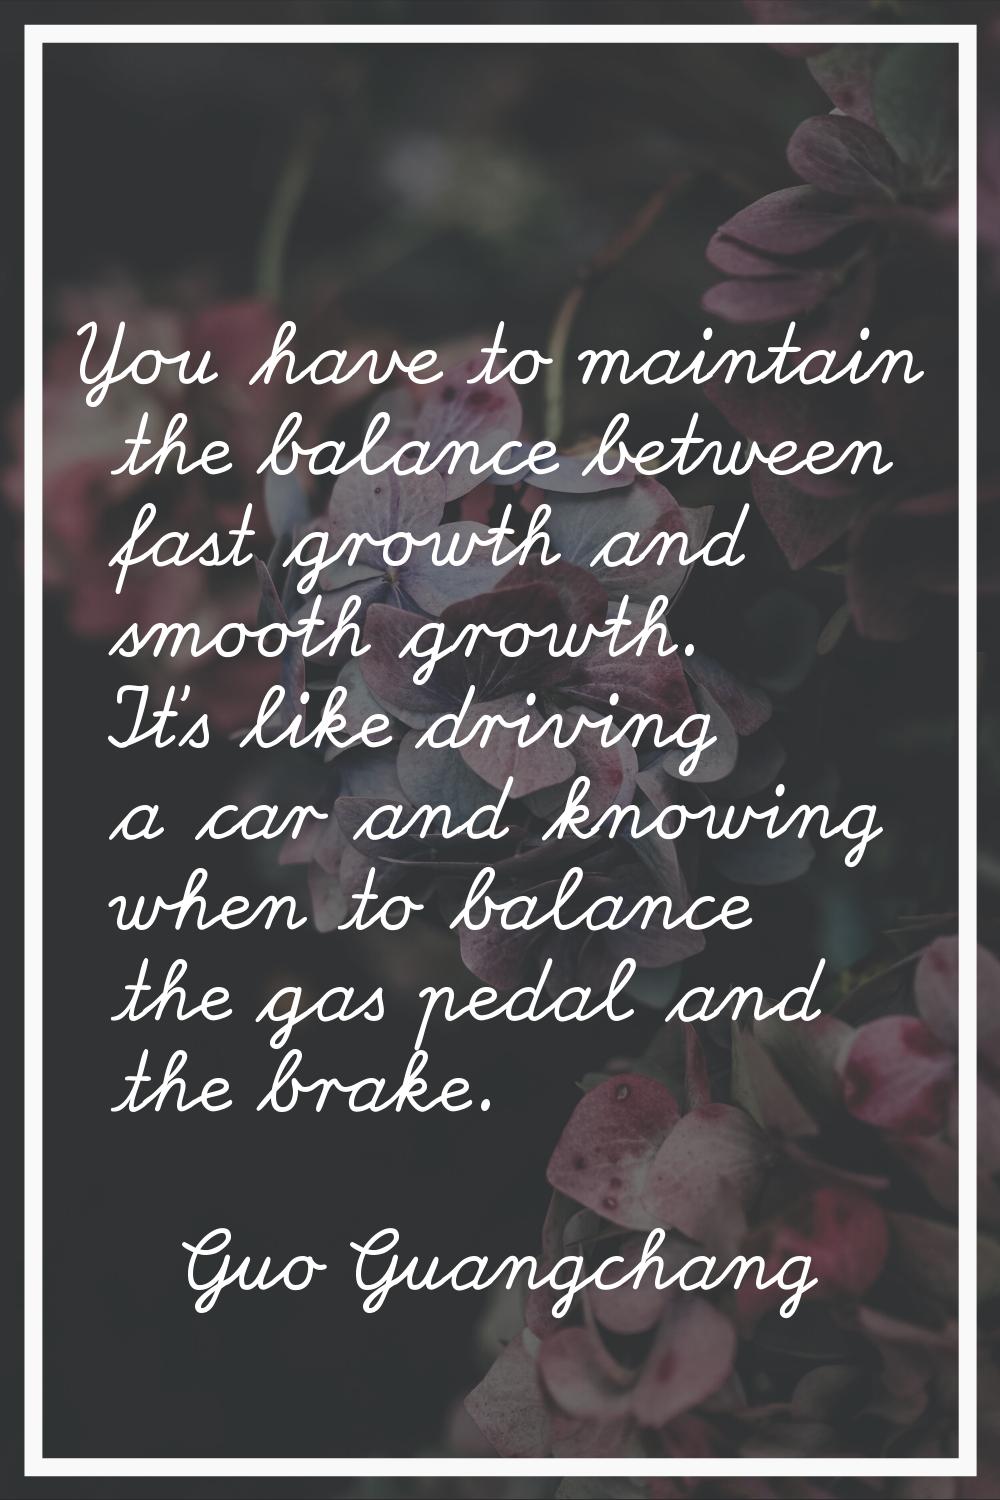 You have to maintain the balance between fast growth and smooth growth. It's like driving a car and